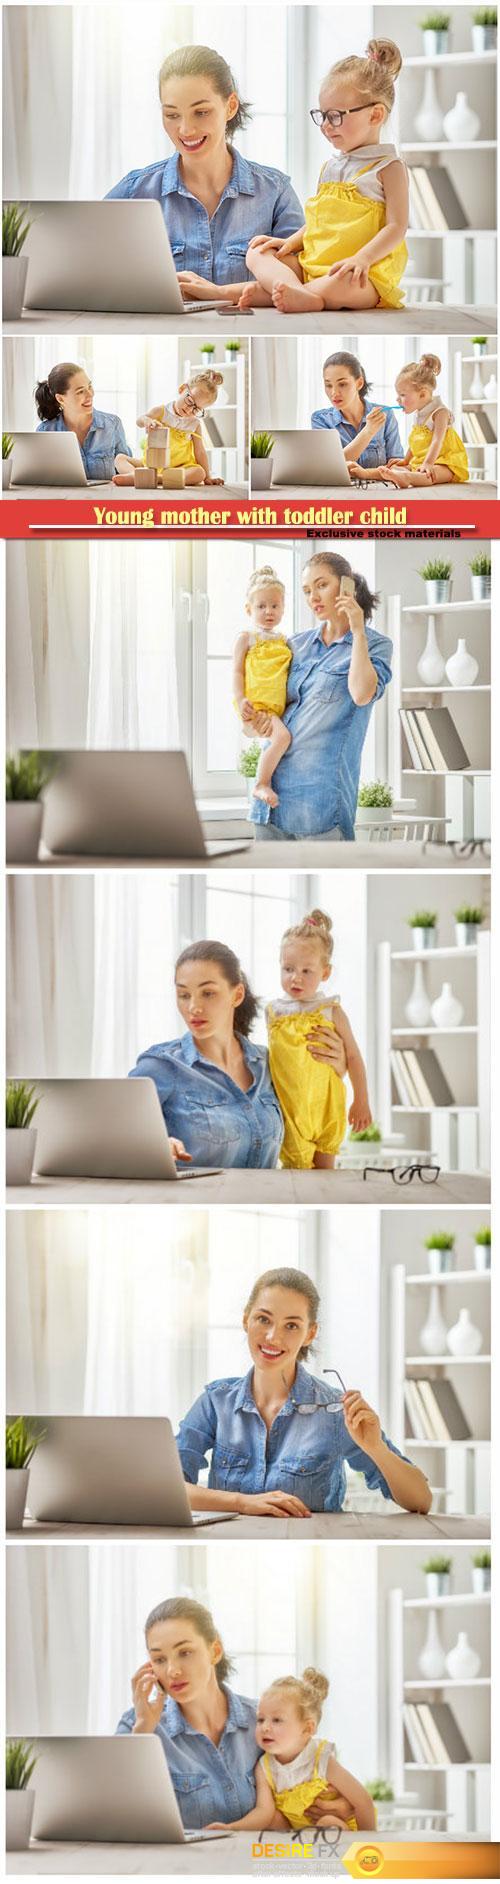 Young mother with toddler child working on the computer from home